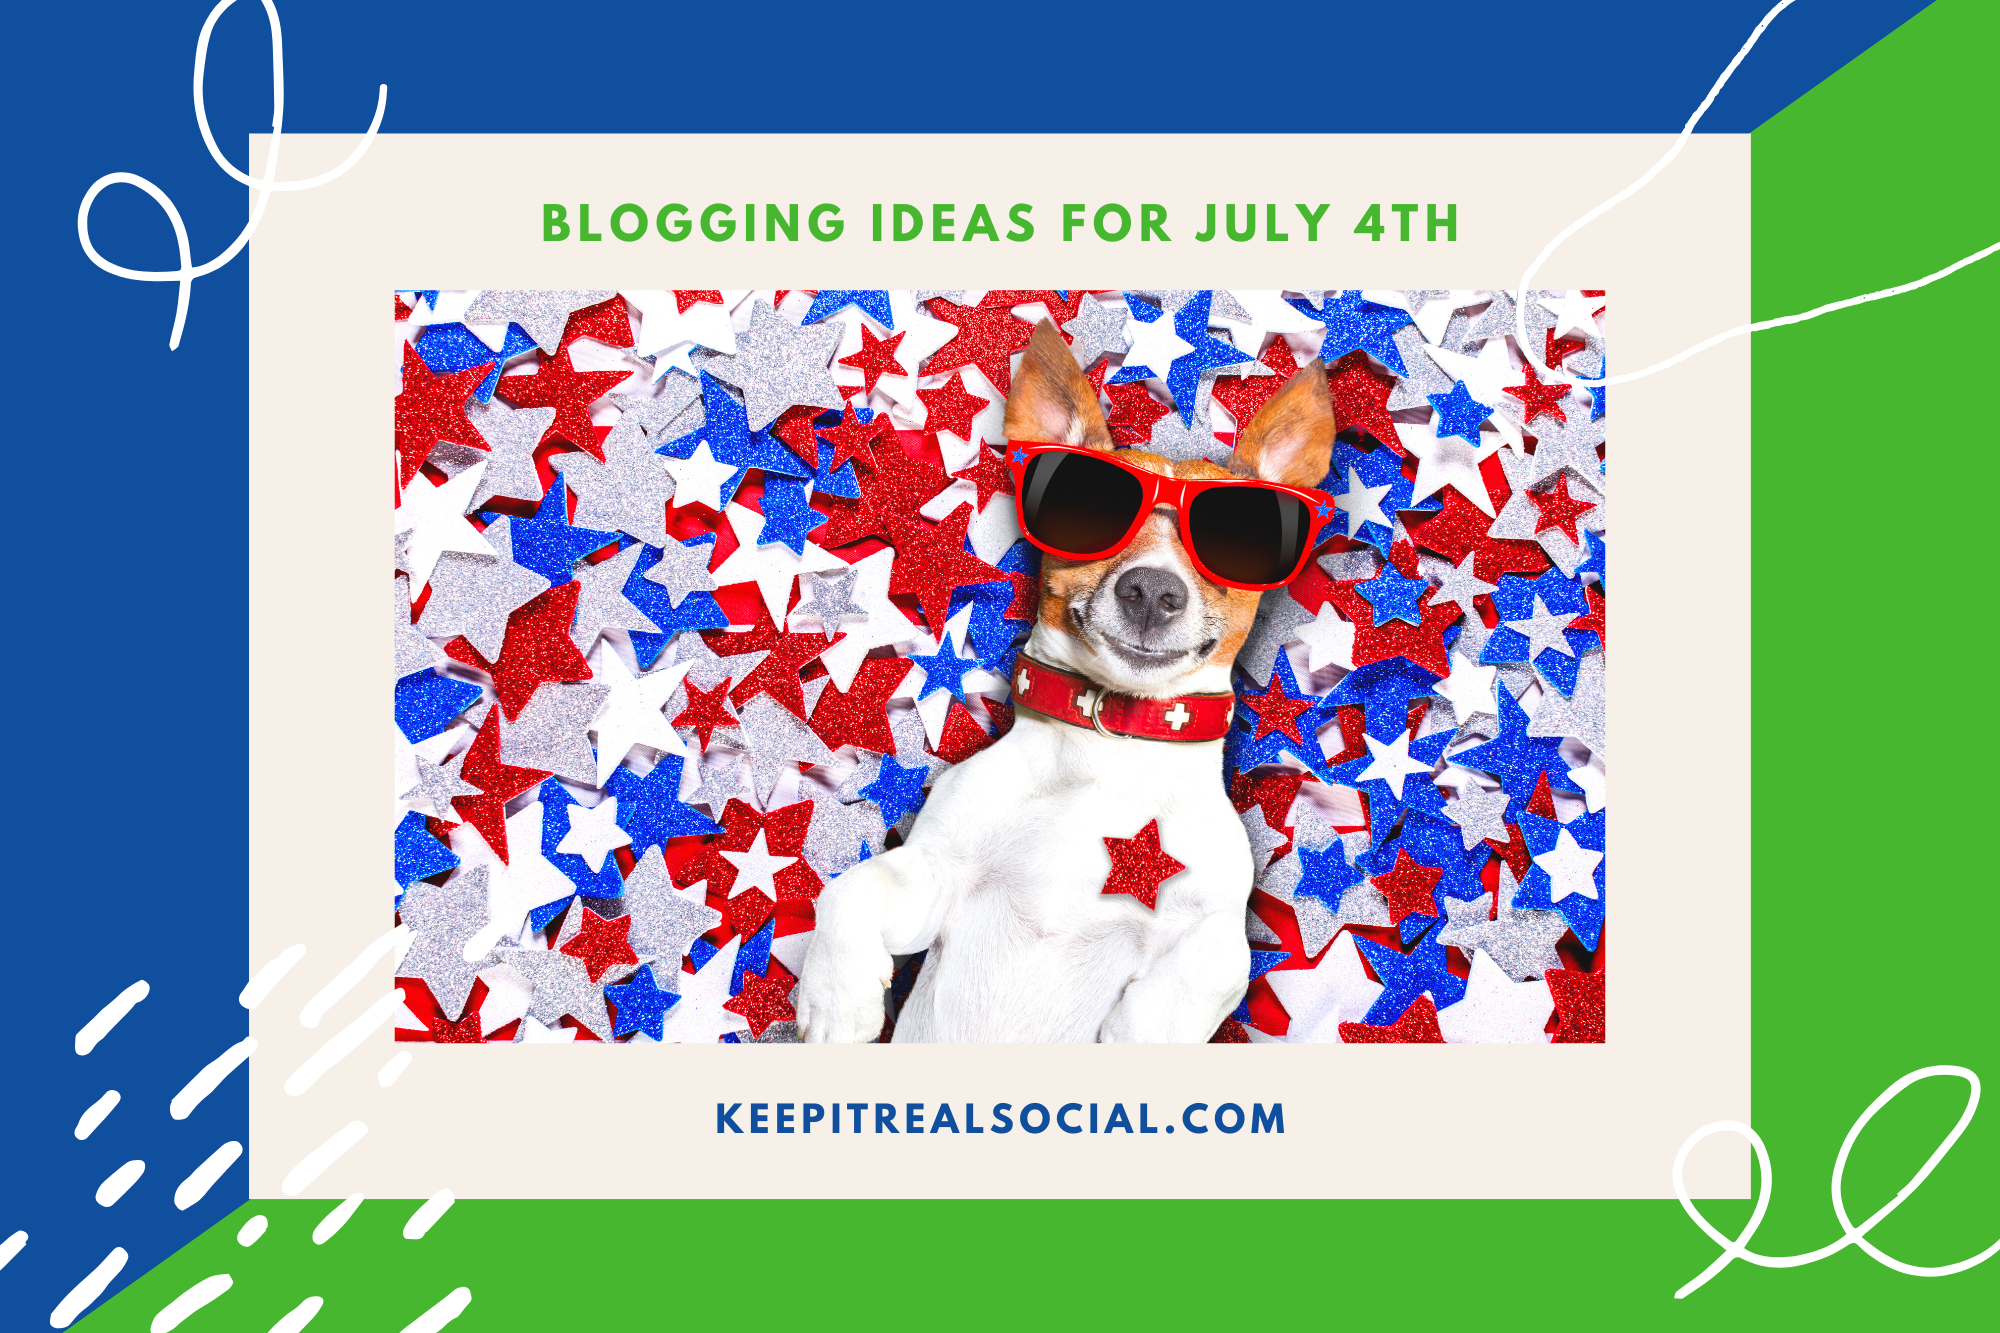 Fourth of July Marketing Ideas from the social media marketing agency Keep it Real Social